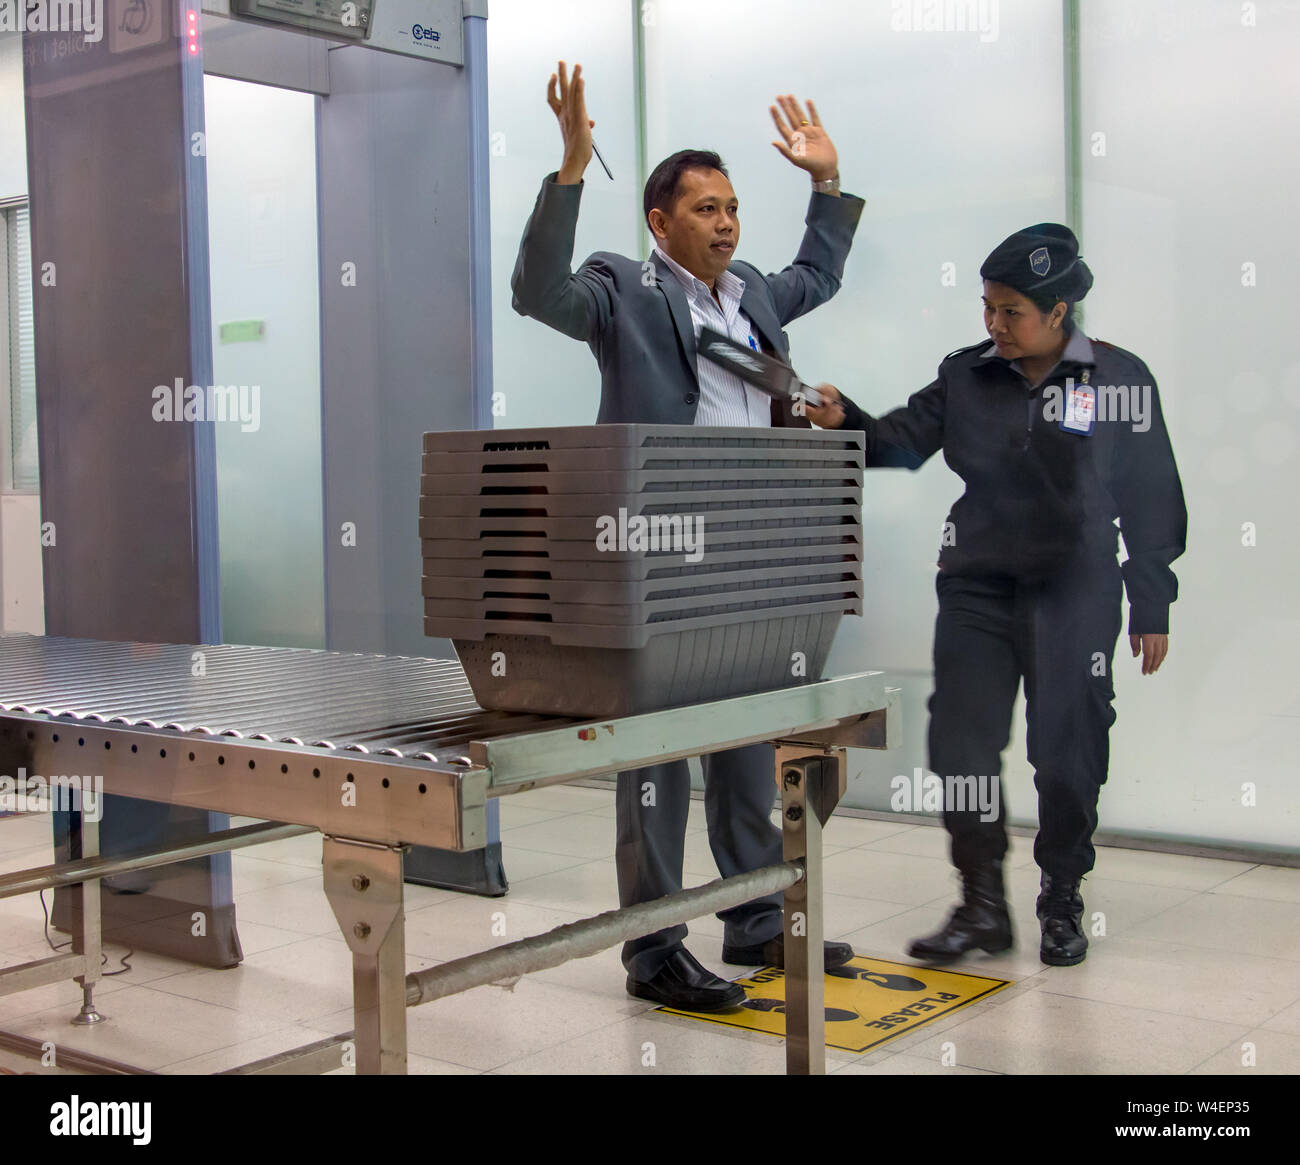 BANGKOK, THAILAND, NOV 27 2018, Control passengers and his baggage at the airport. Security officer at the airport checked people before departure. Stock Photo